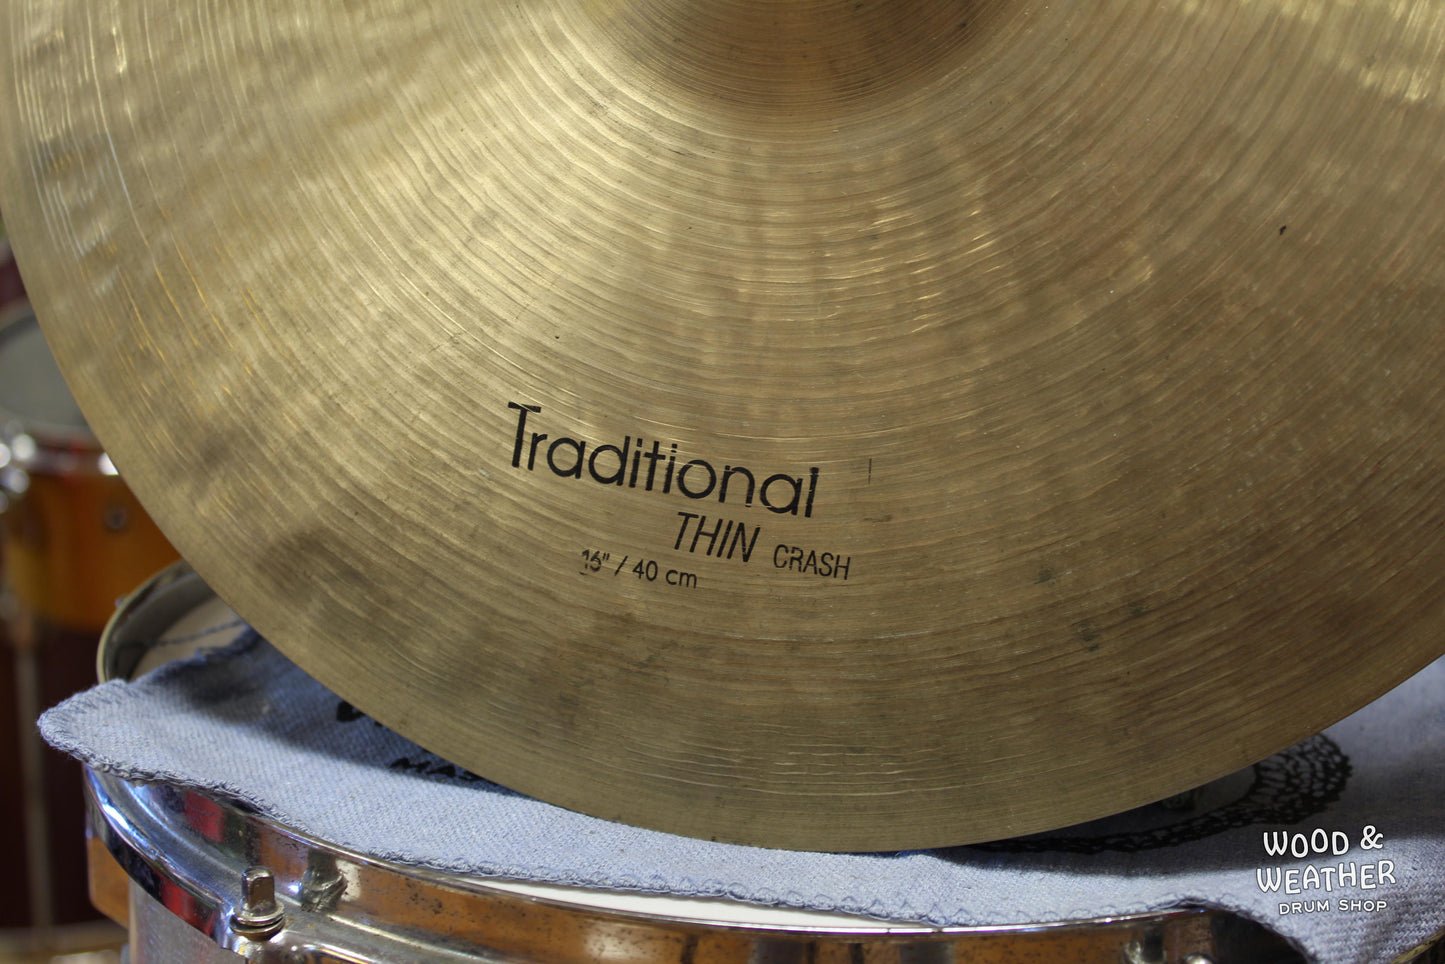 Used Istanbul Agop 16" Traditional Thin Crash Cymbal 901g